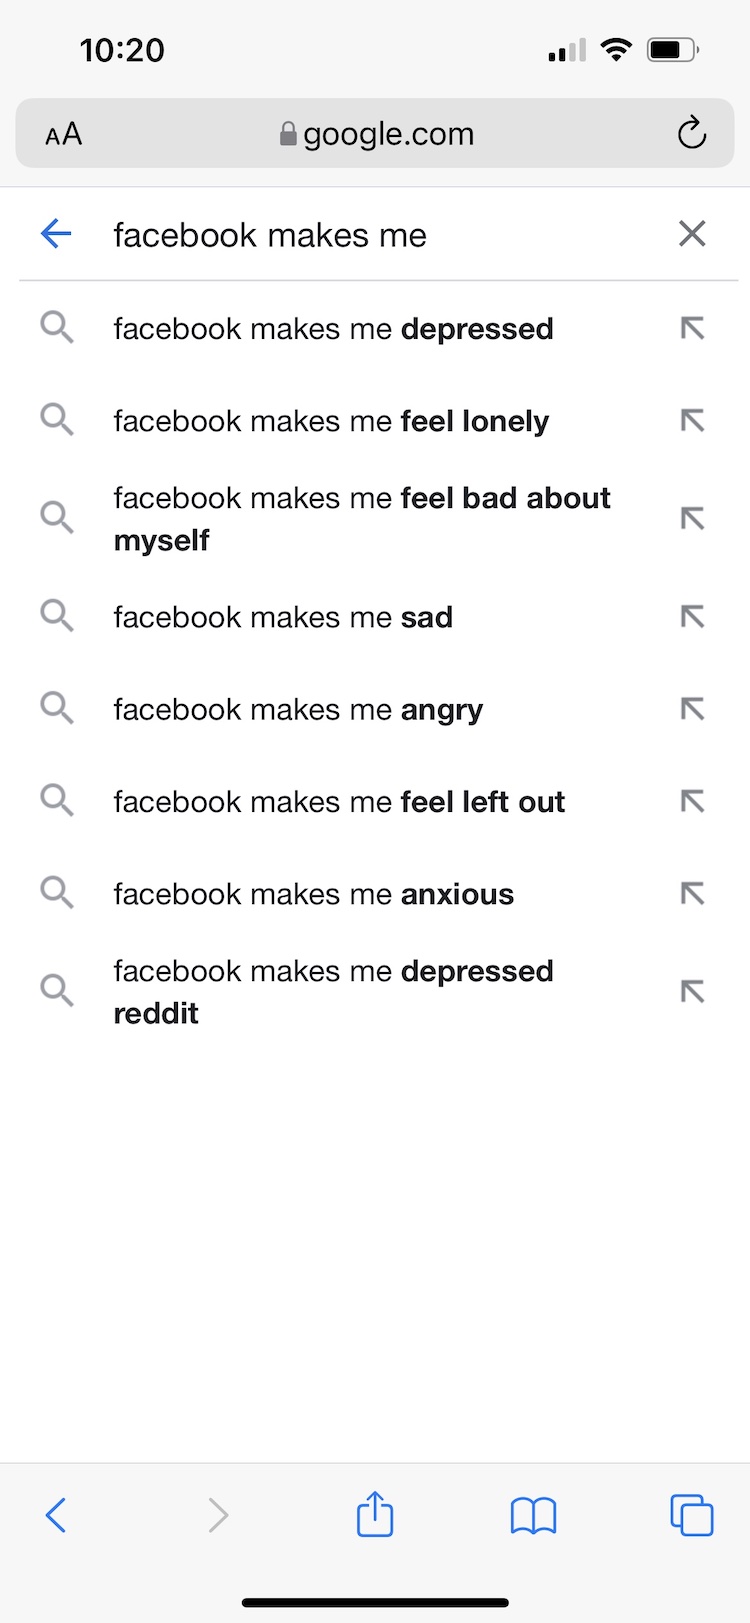 Screenshot of a Google search showing autocompletes related to Facebook.